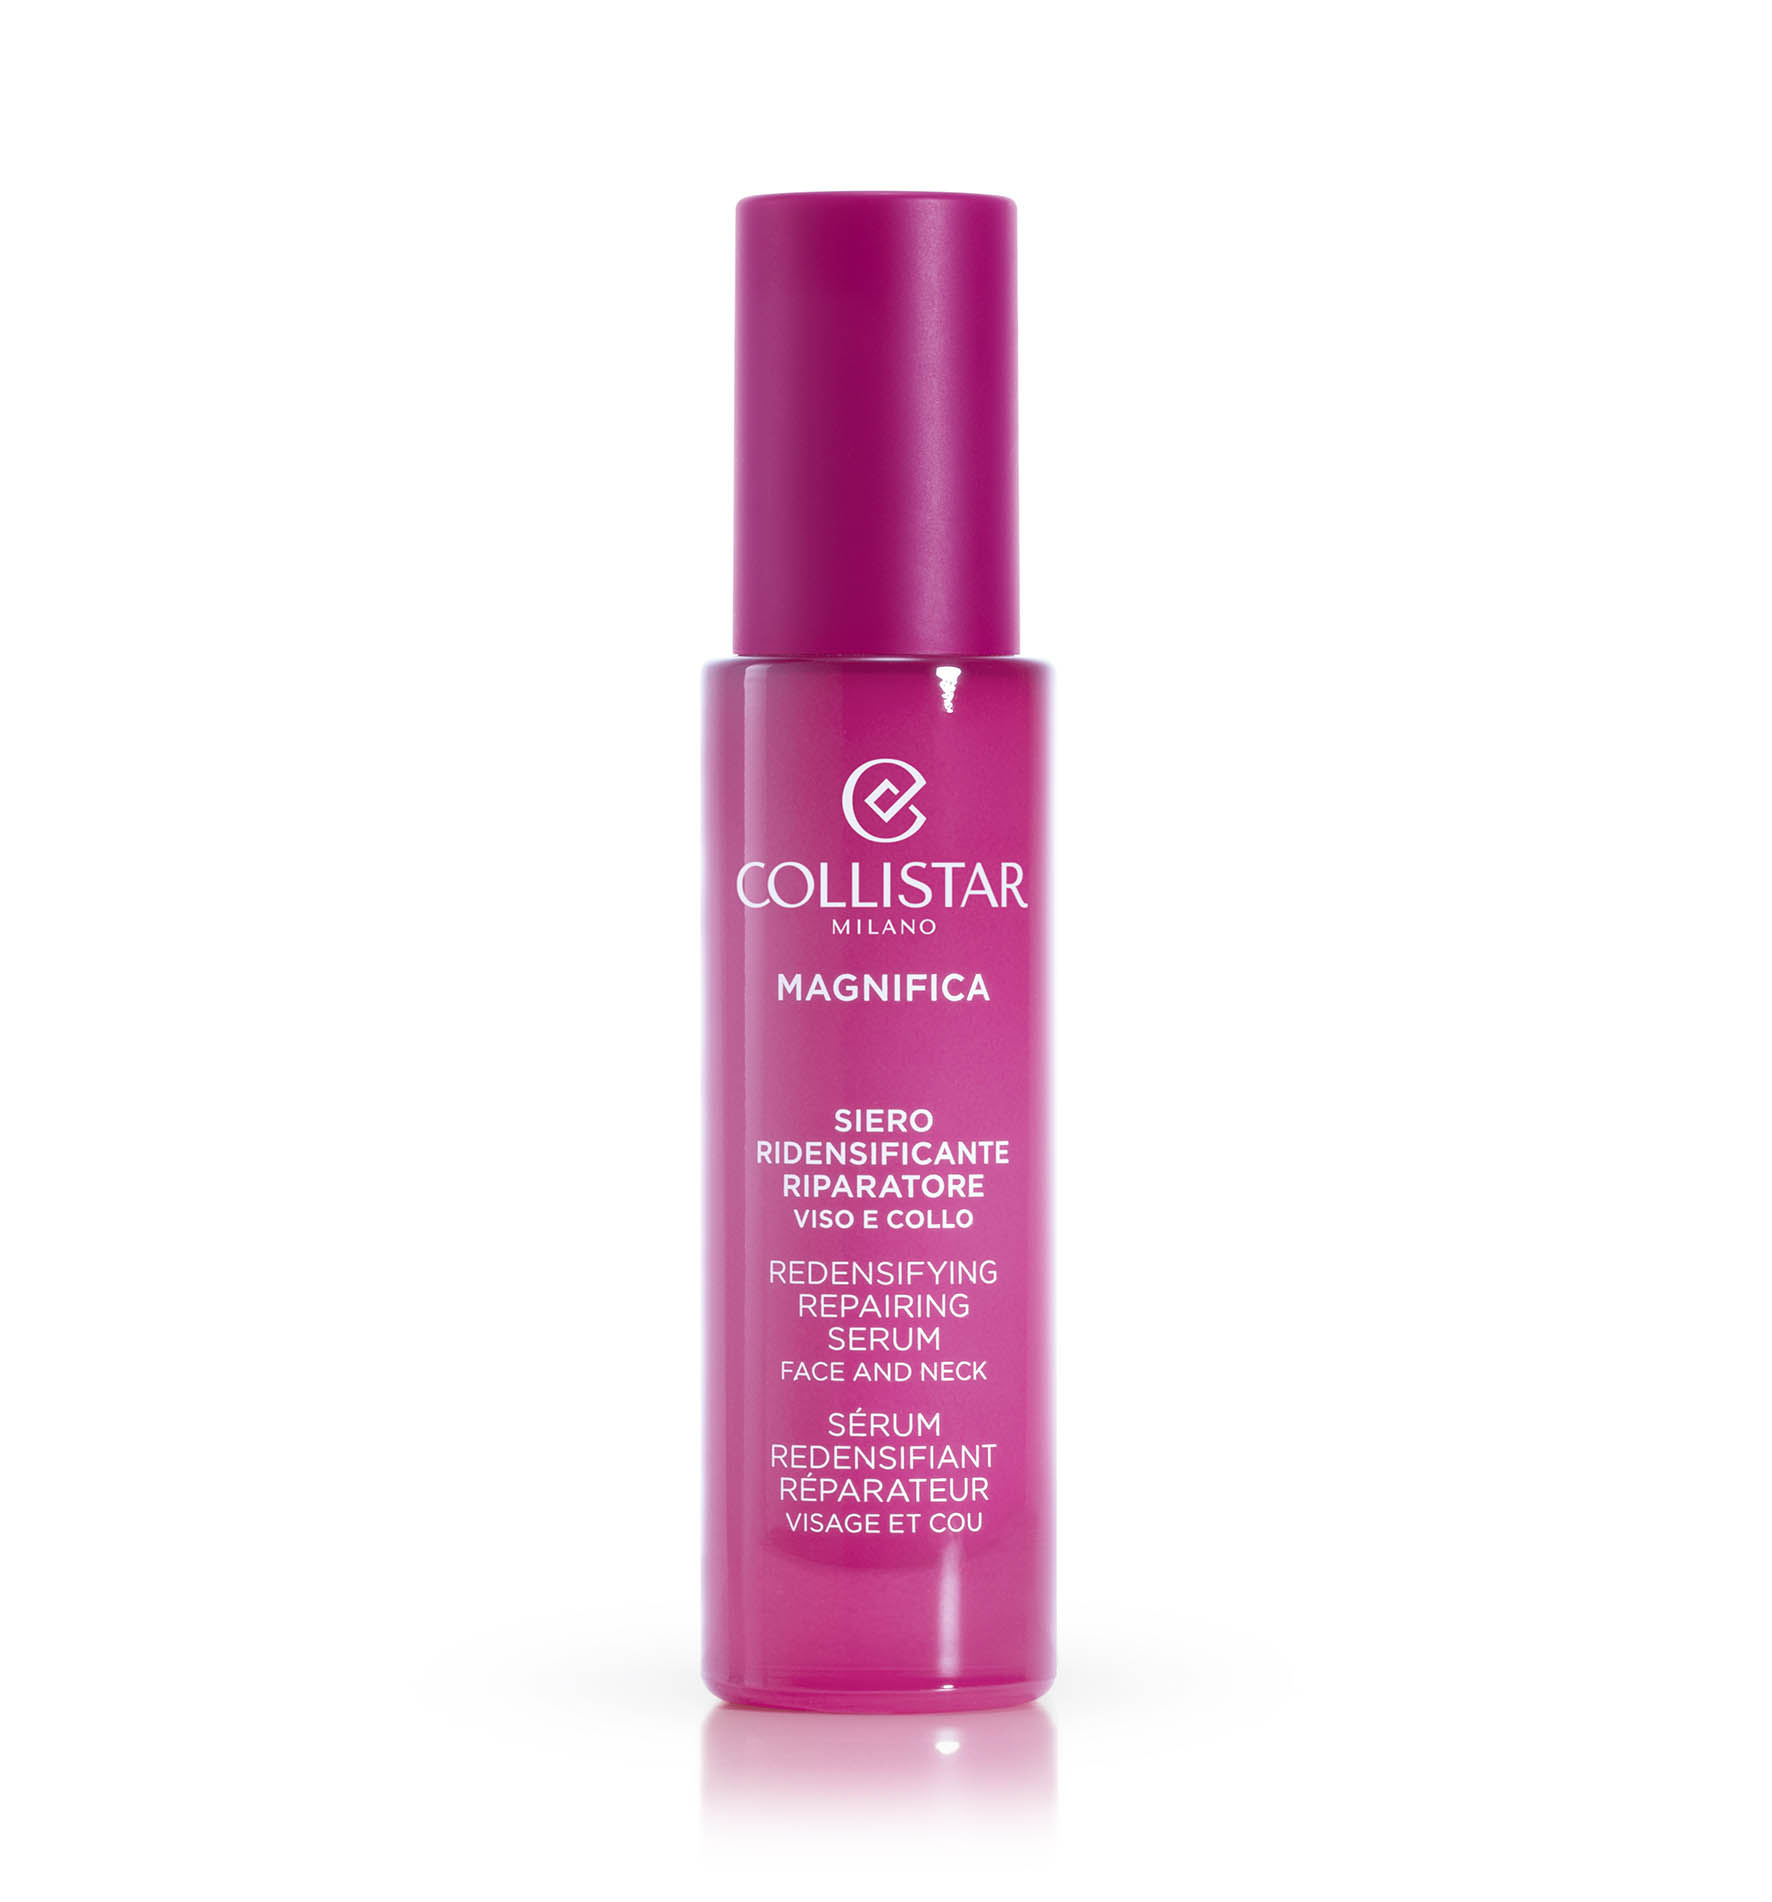 MAGNIFICA REDENSIFYING REPAIRING SERUM FACE AND NECK - Face | Collistar - Shop Online Ufficiale